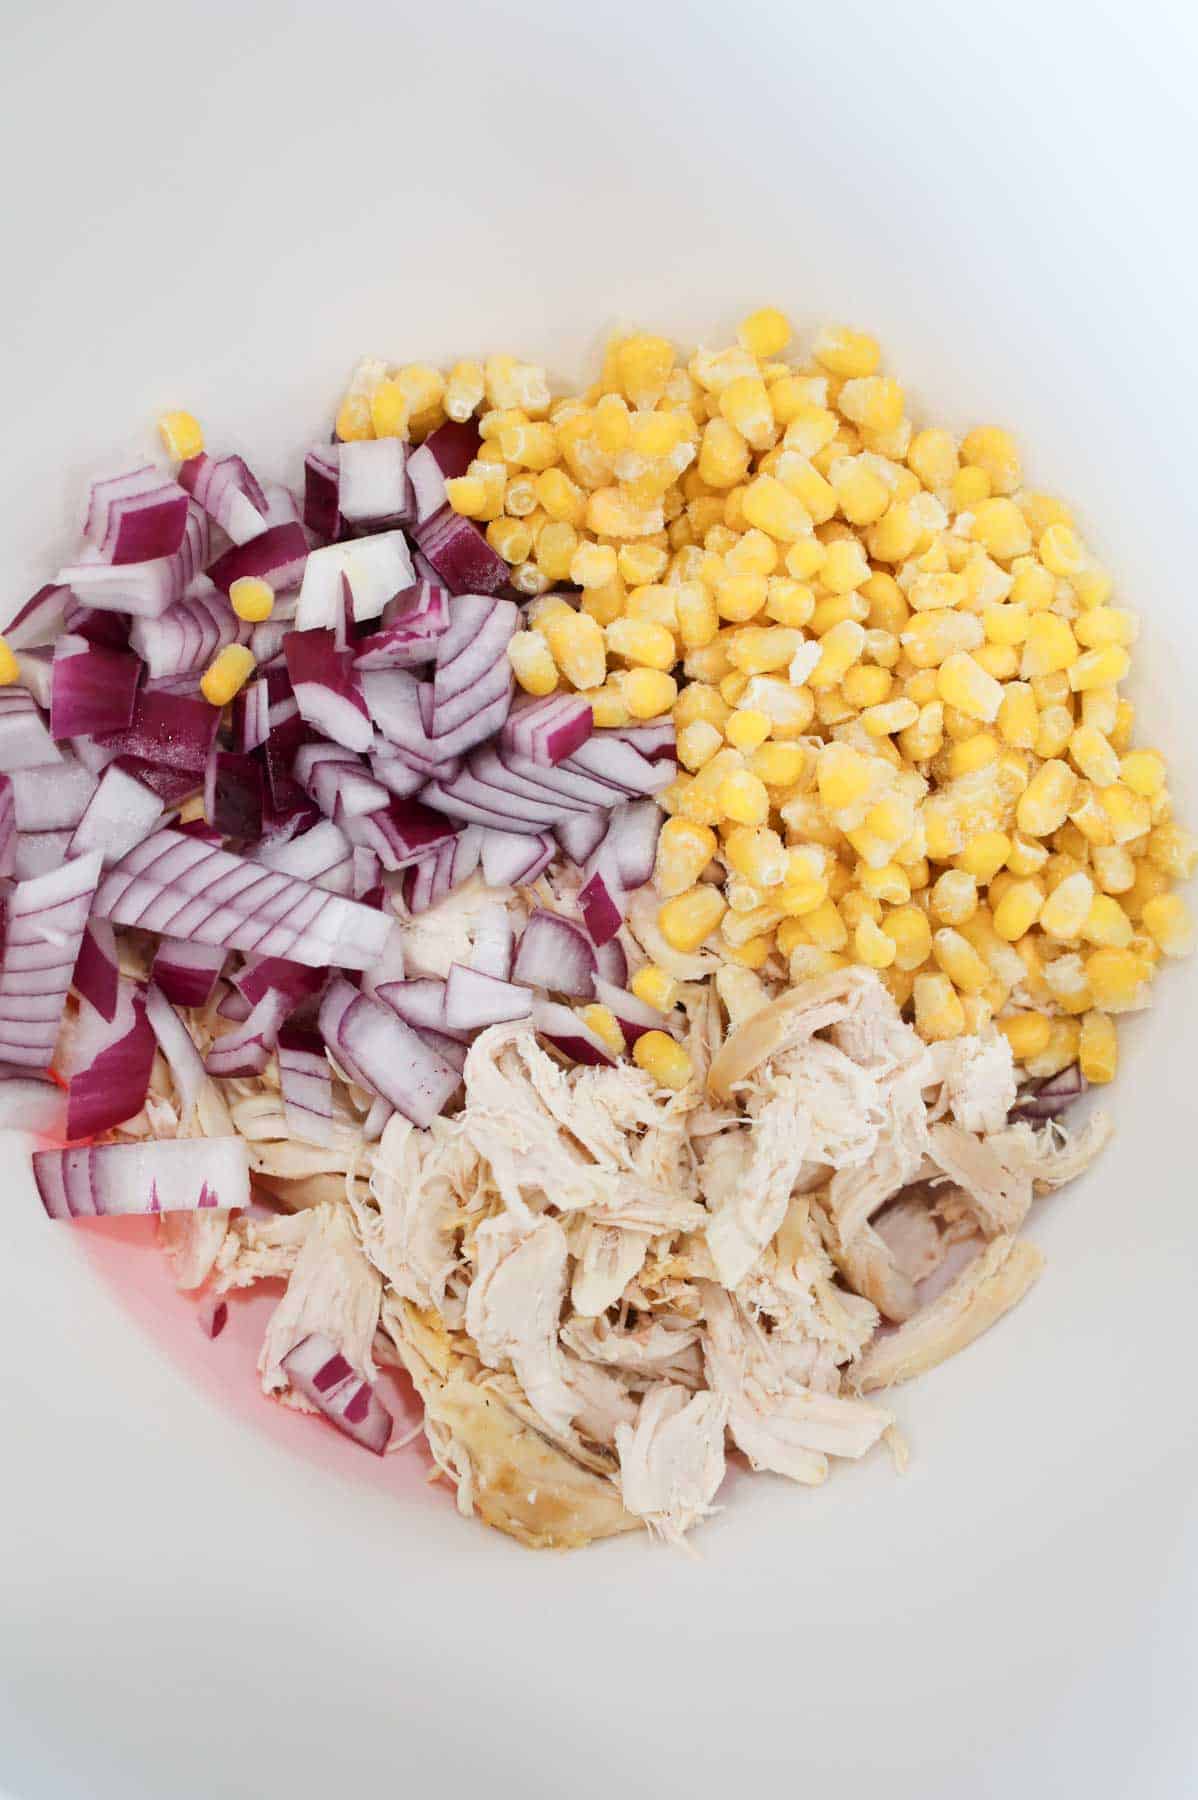 corn kernels, diced red onions and shredded chicken in a bowl